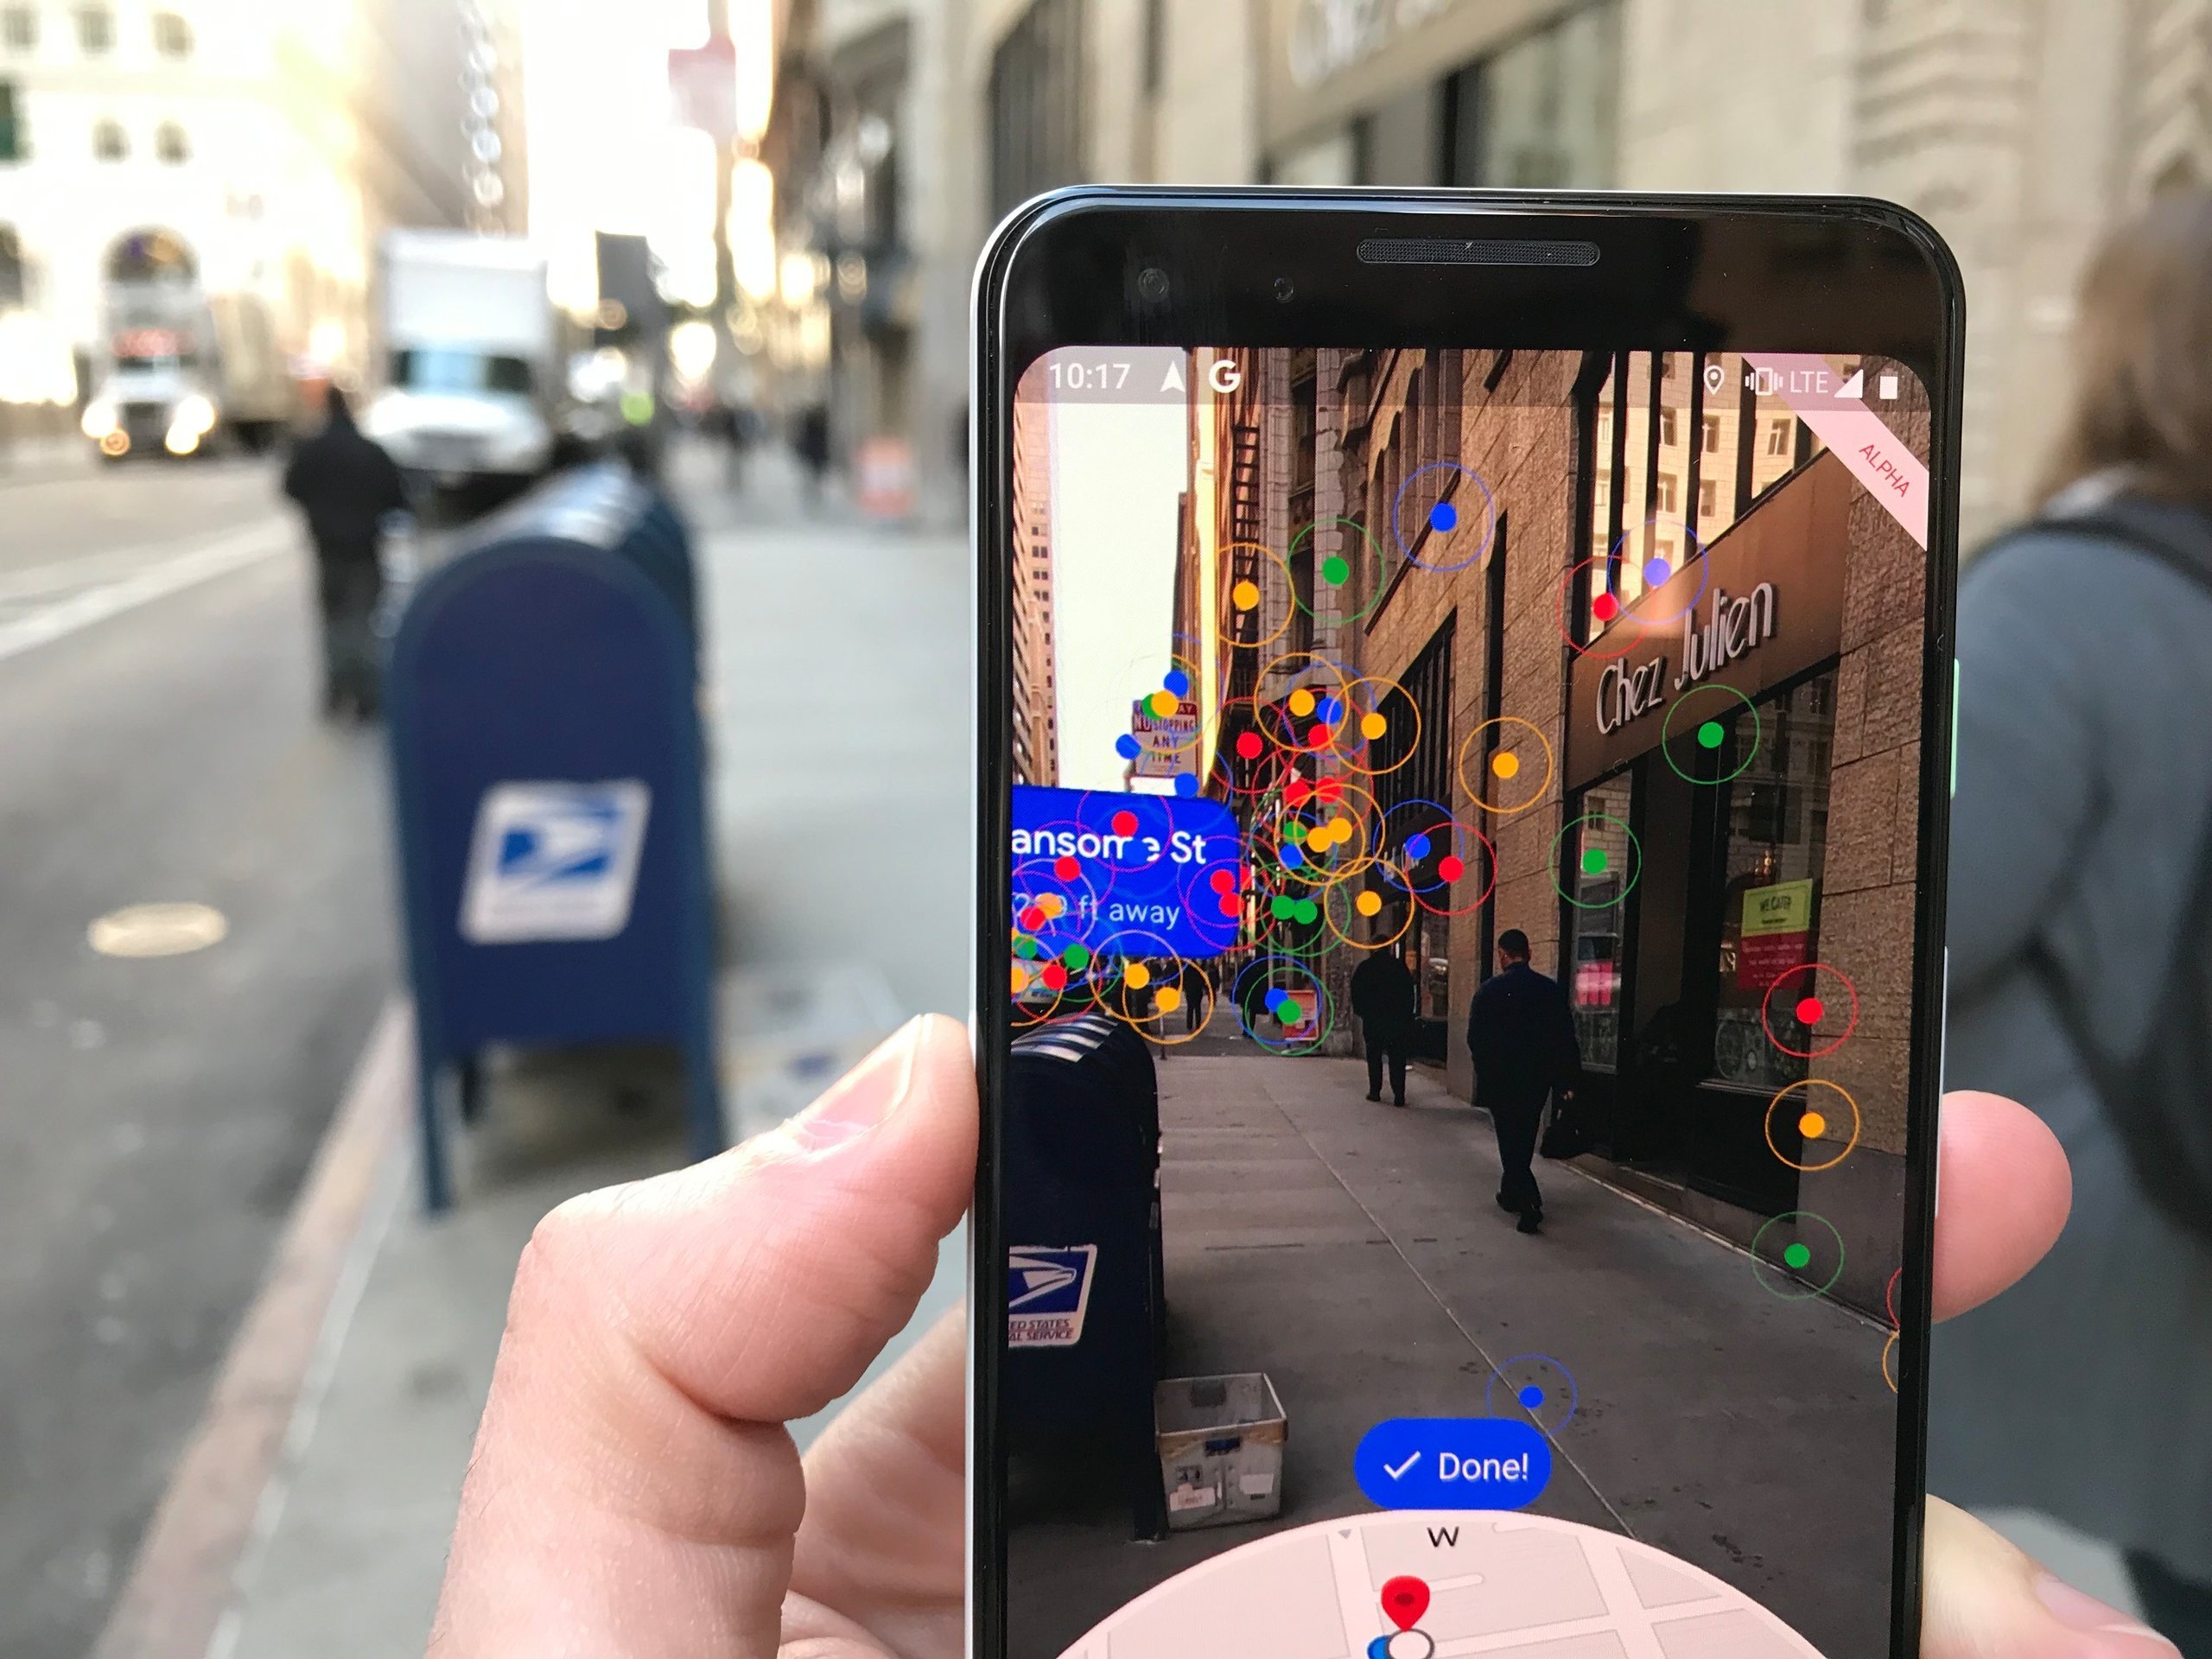 The augmented reality feature on Google Maps, which displays the view in front of you on your phone, with arrows and coloured identification markers around buildings, aims to help you easily find your way in unfamiliar places. Photos: Business Insider